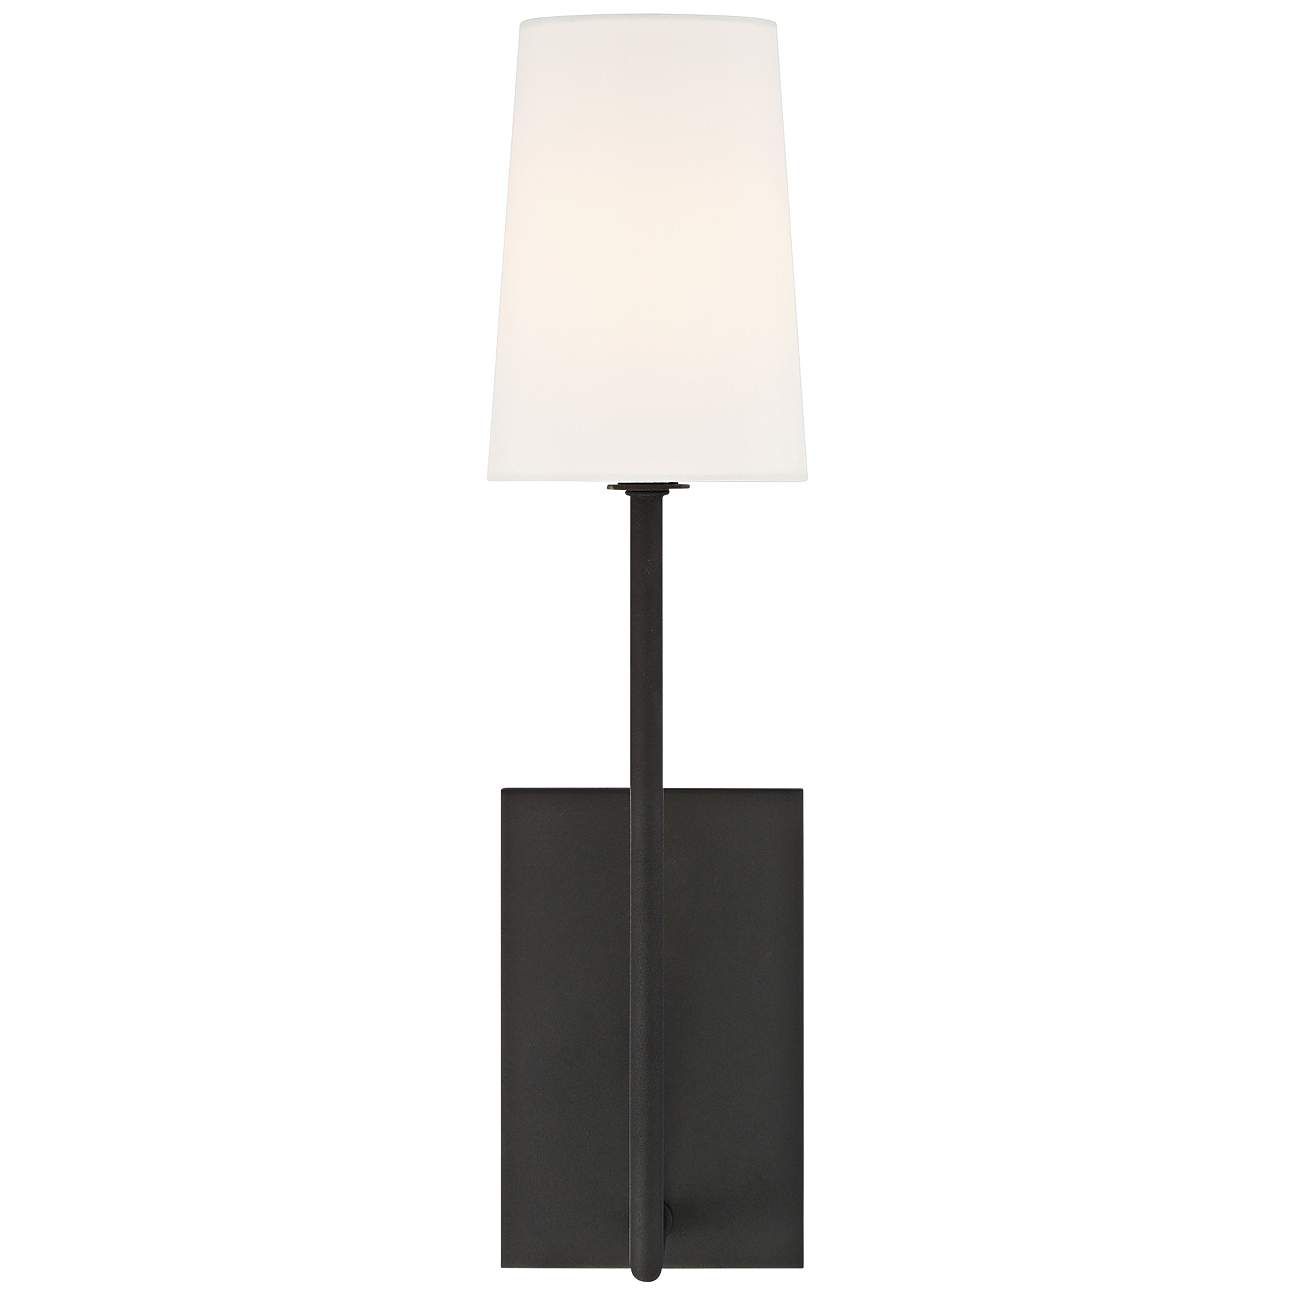 Crystorama Lena 18" High Black Forged Wall Sconce | LampsPlus.com